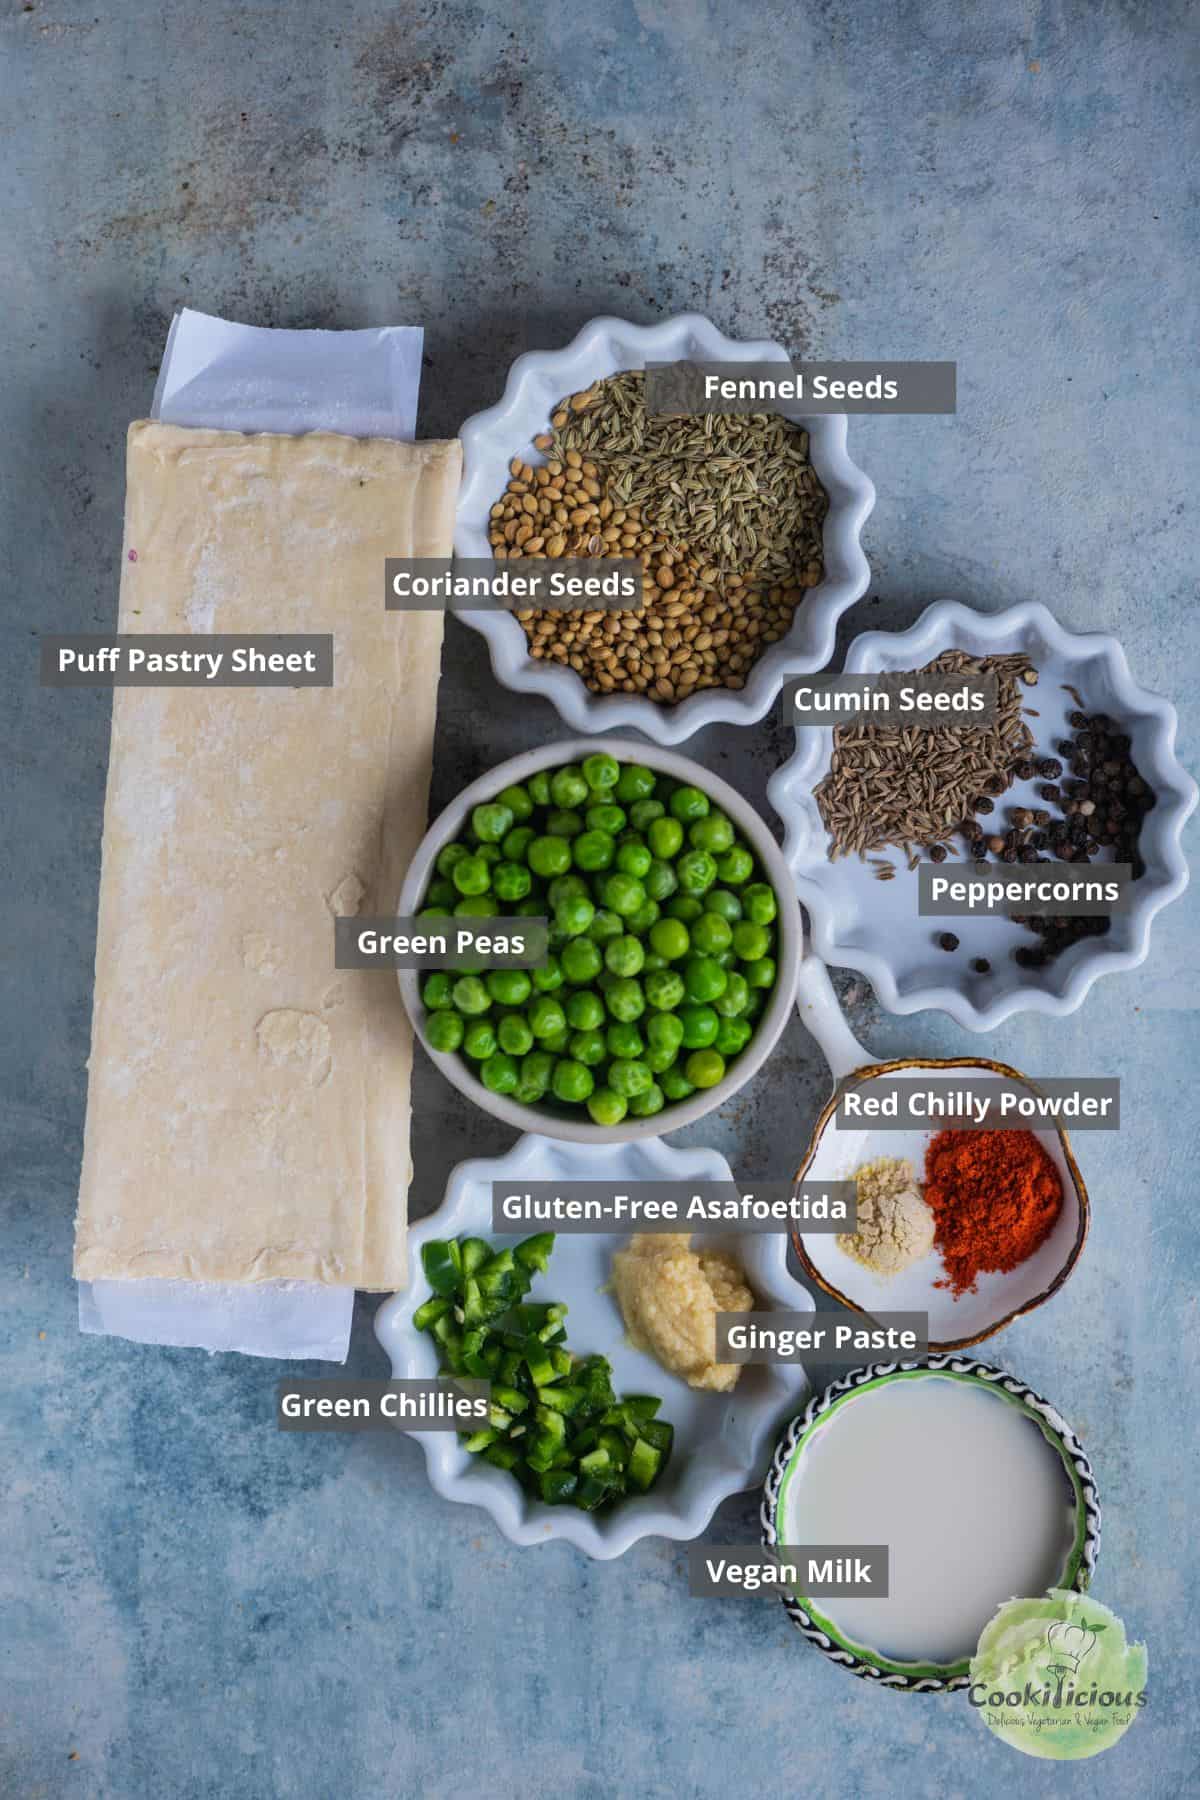 All the ingredients needed to make Puff Pastry Pinwheels With Matar Kachori Filling placed on a table with labels on them.